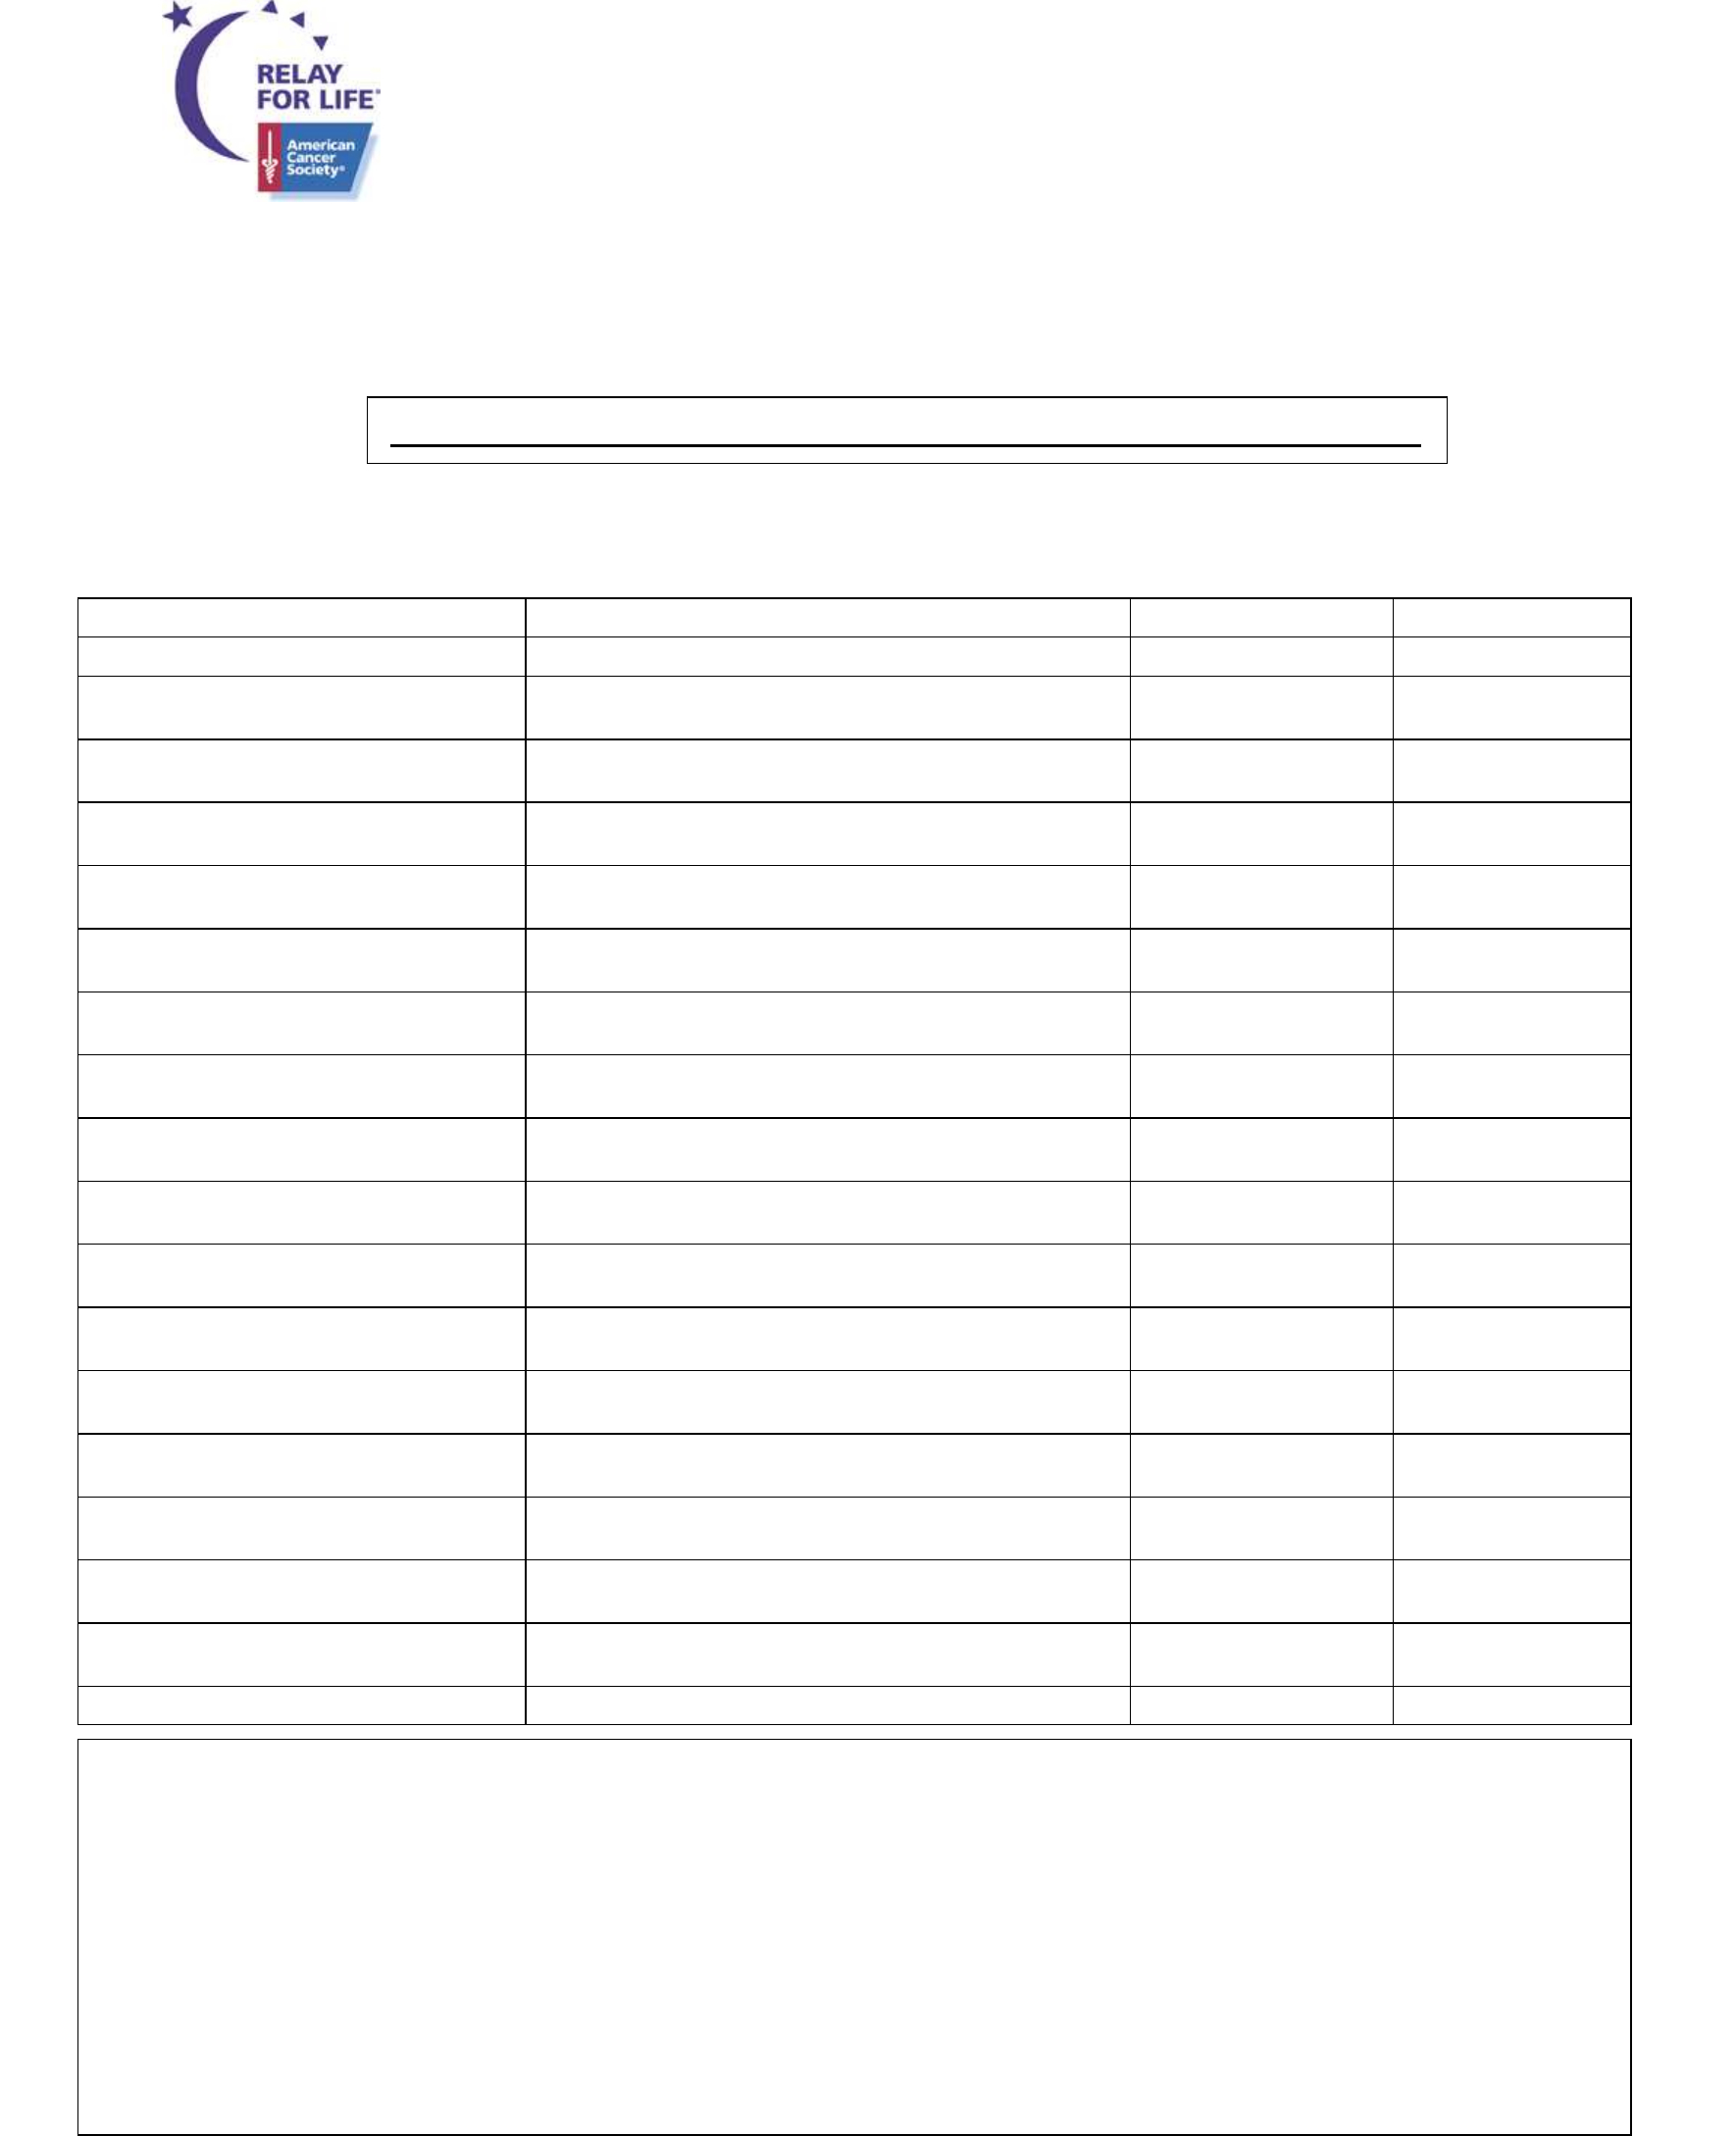 Relay For Life Donation Form – America Free Download Intended For Blank Sponsor Form Template Free